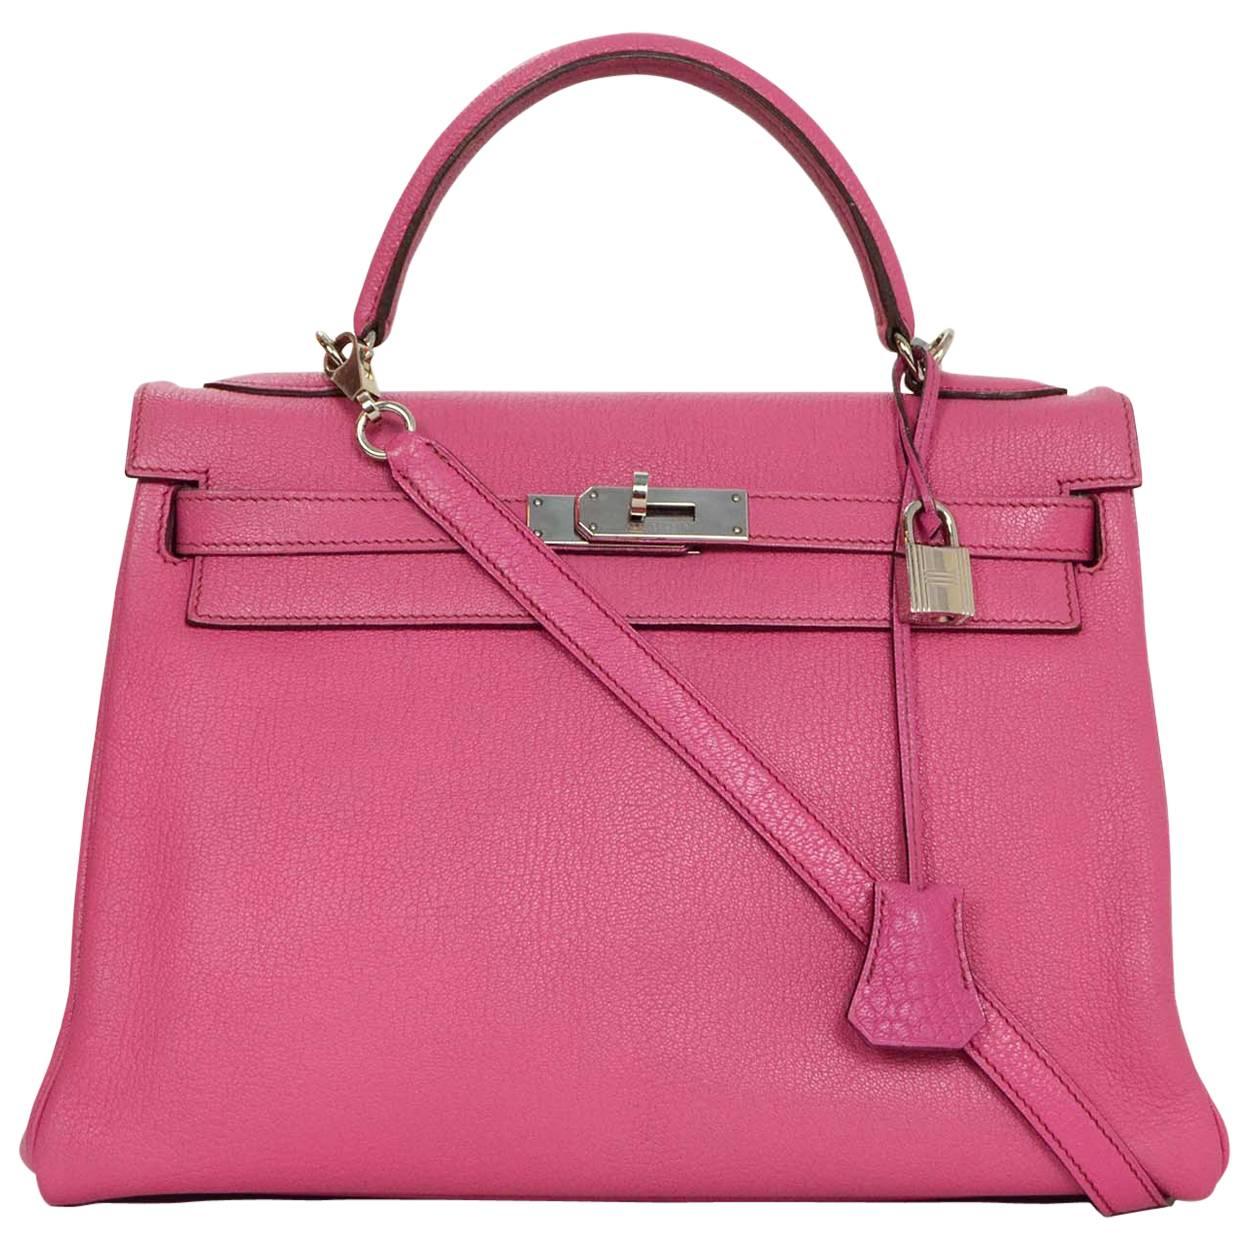 Hermes RARE Hot Pink Rose Tyrien Chevre Leather 32cm Kelly Bag with Strap PHW